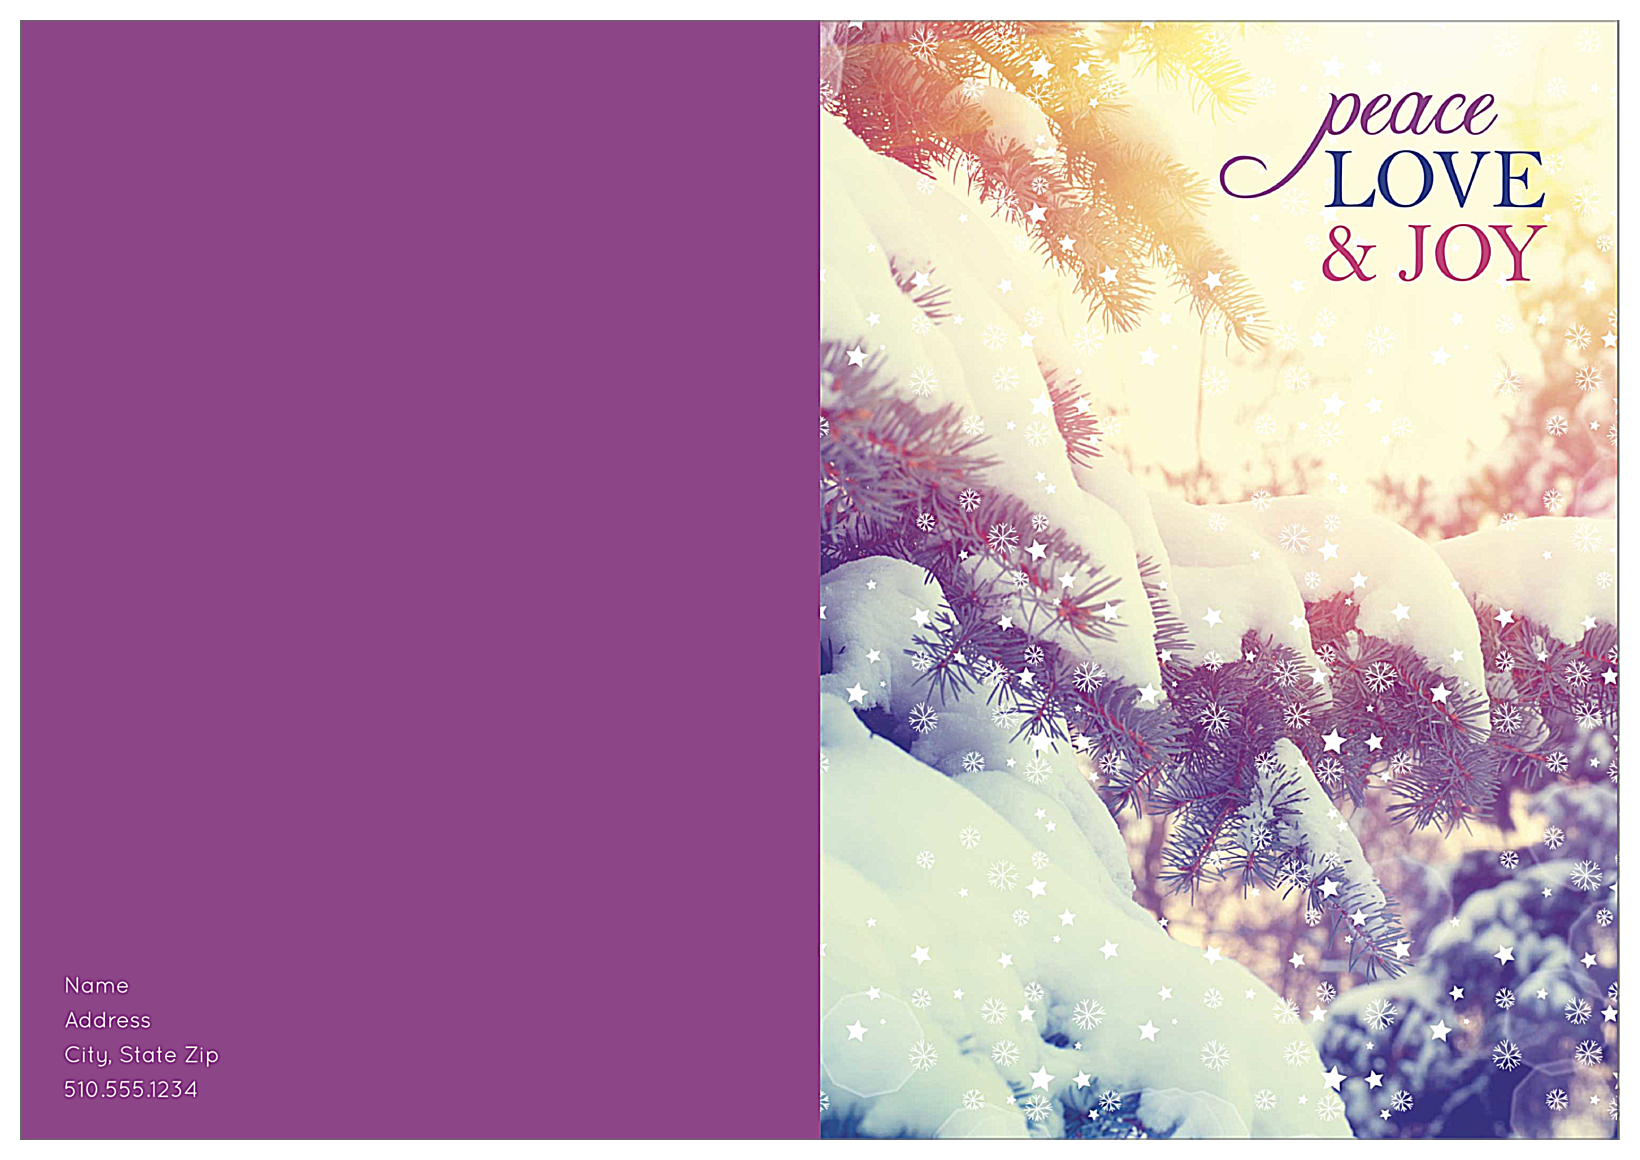 Snowy Peace front - Greeting Cards Maker